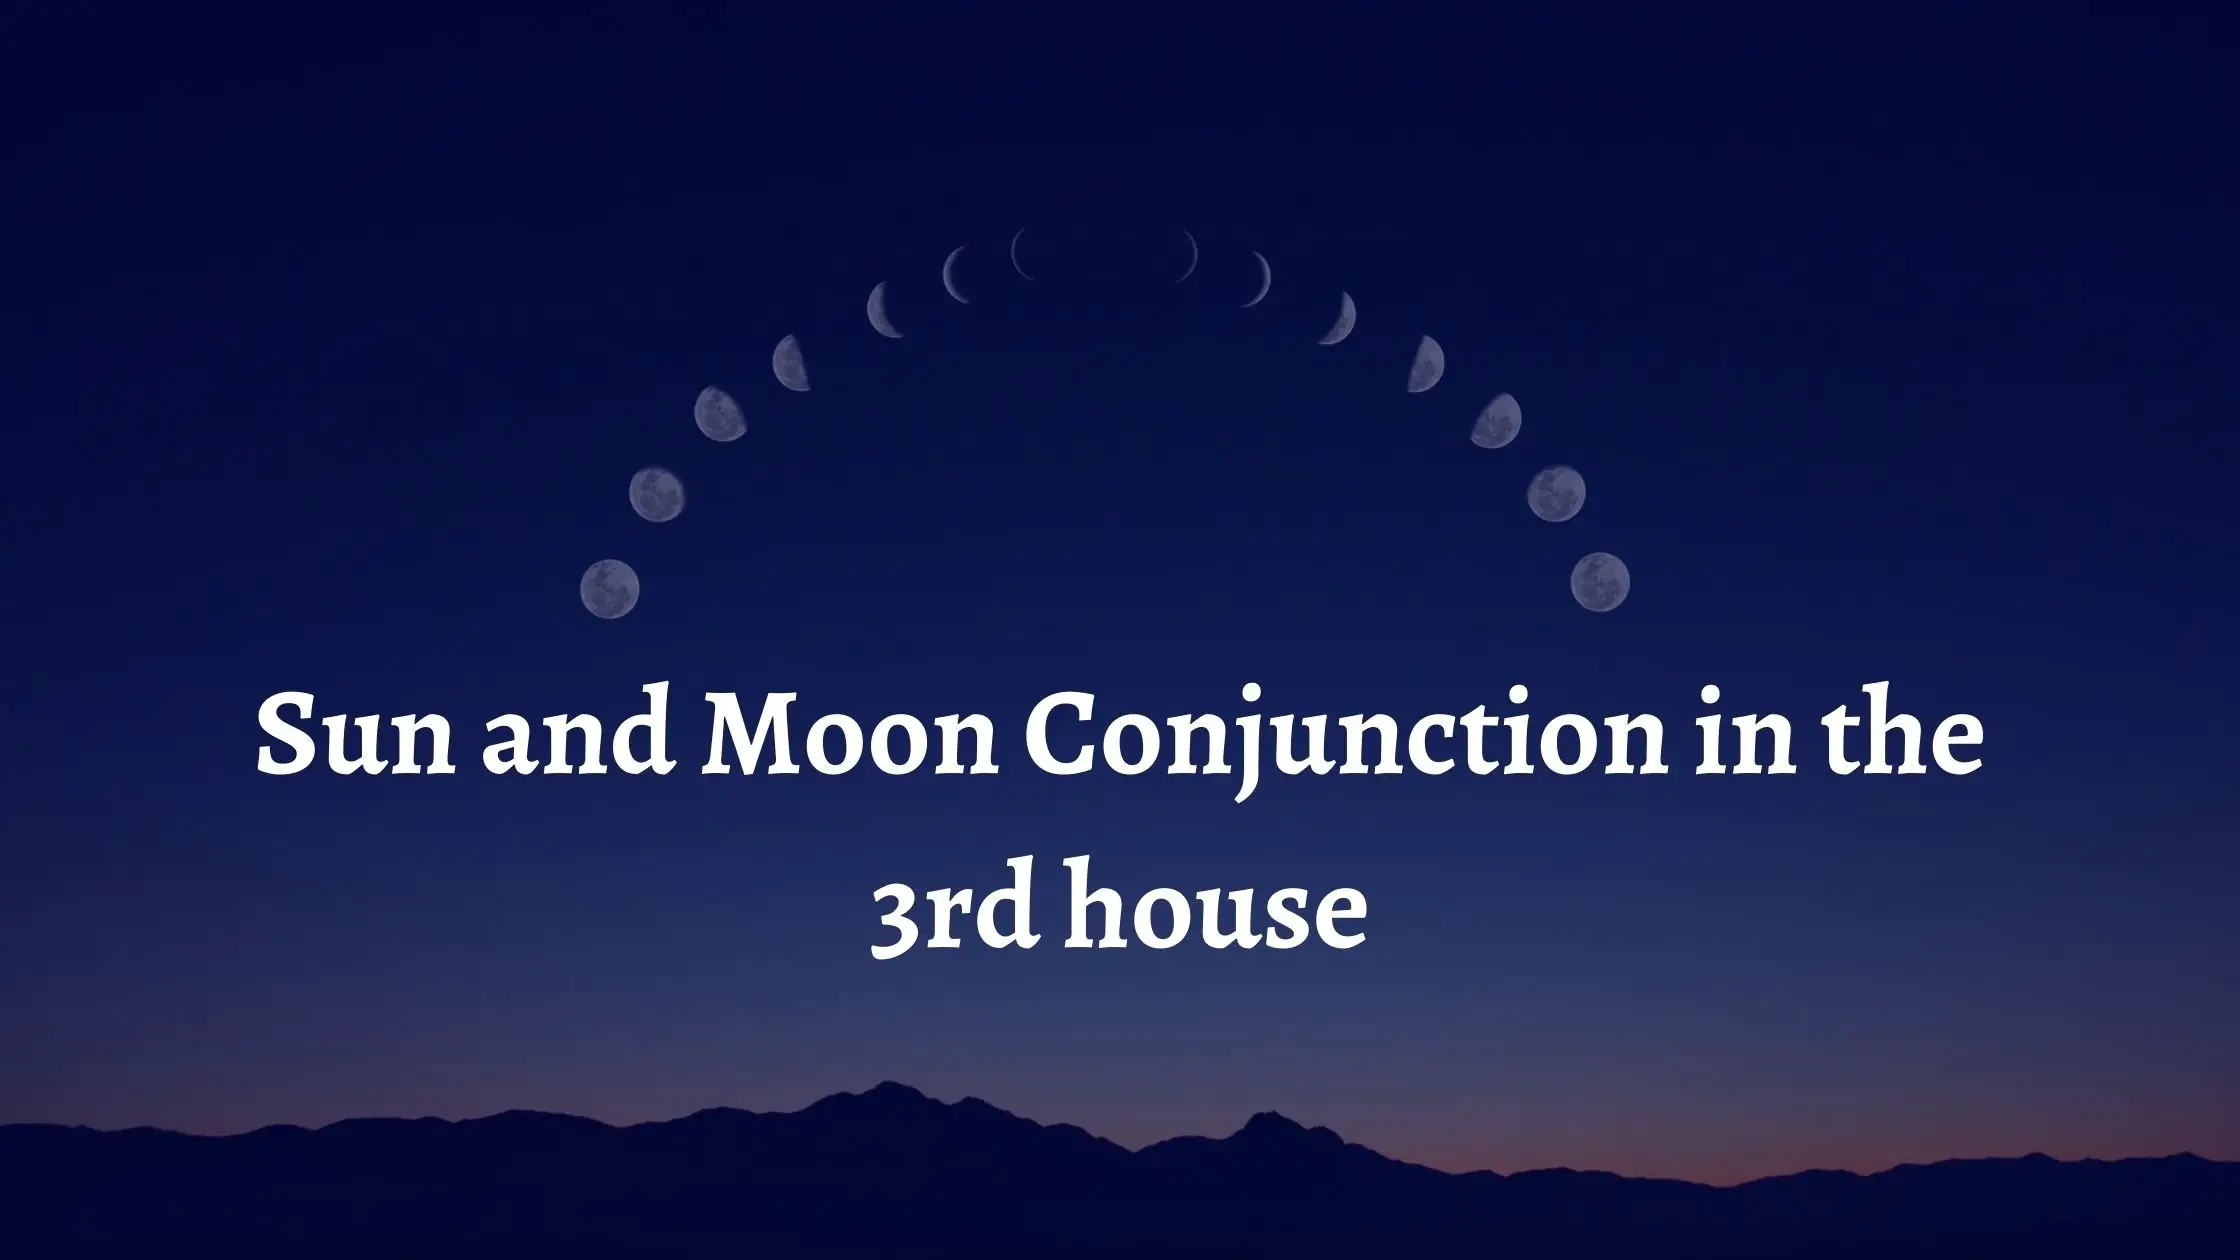 Sun and Moon Conjunction in the 3rd house